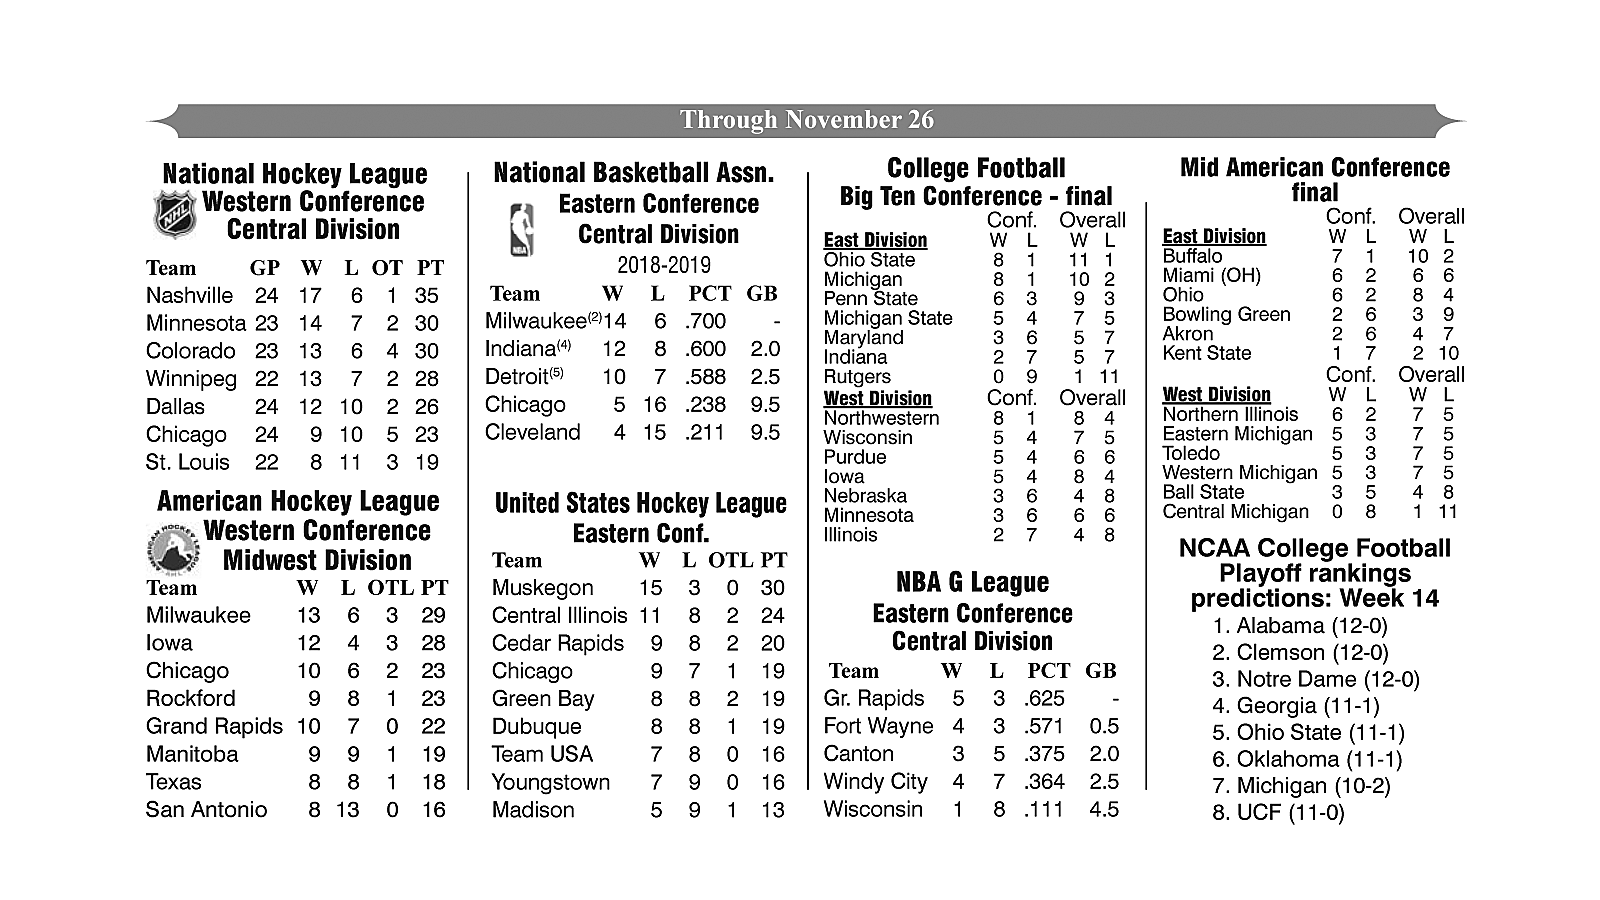 Professional Basketball, Hockey, and College Football, Standings Through November 26, 2018